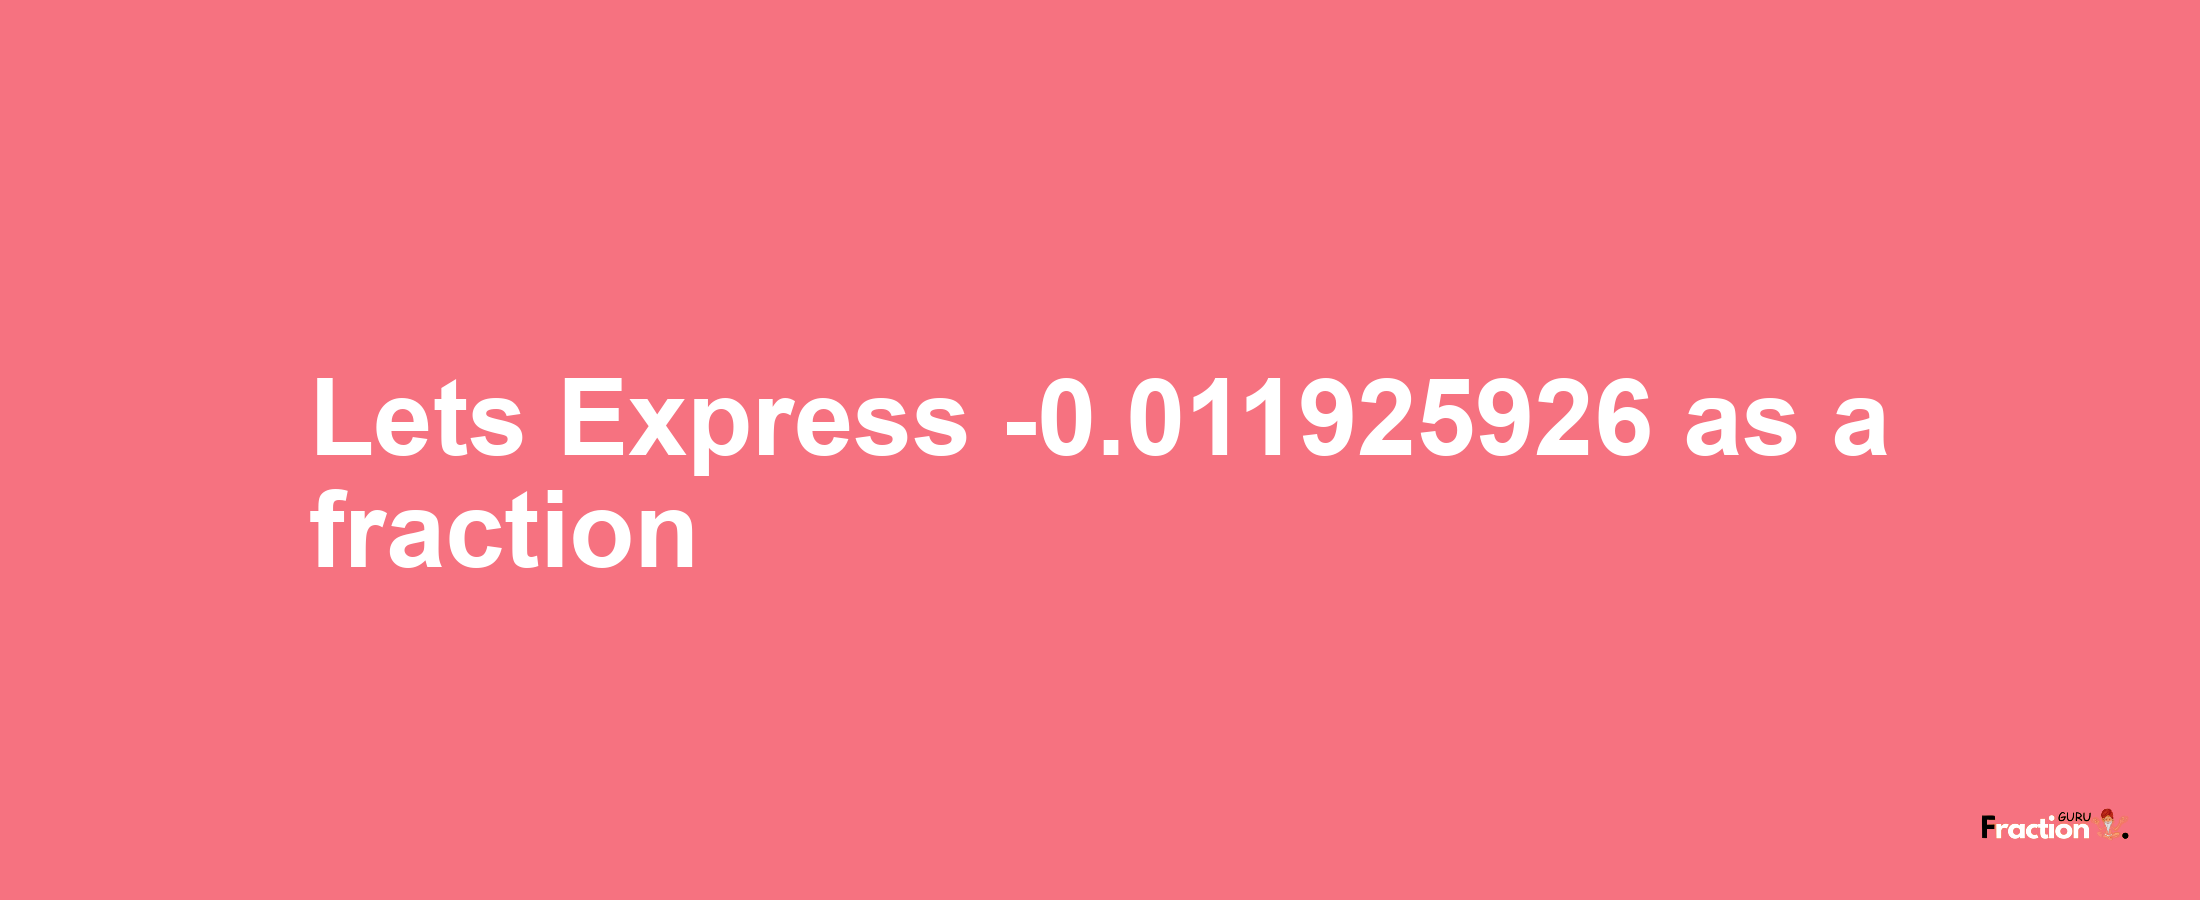 Lets Express -0.011925926 as afraction